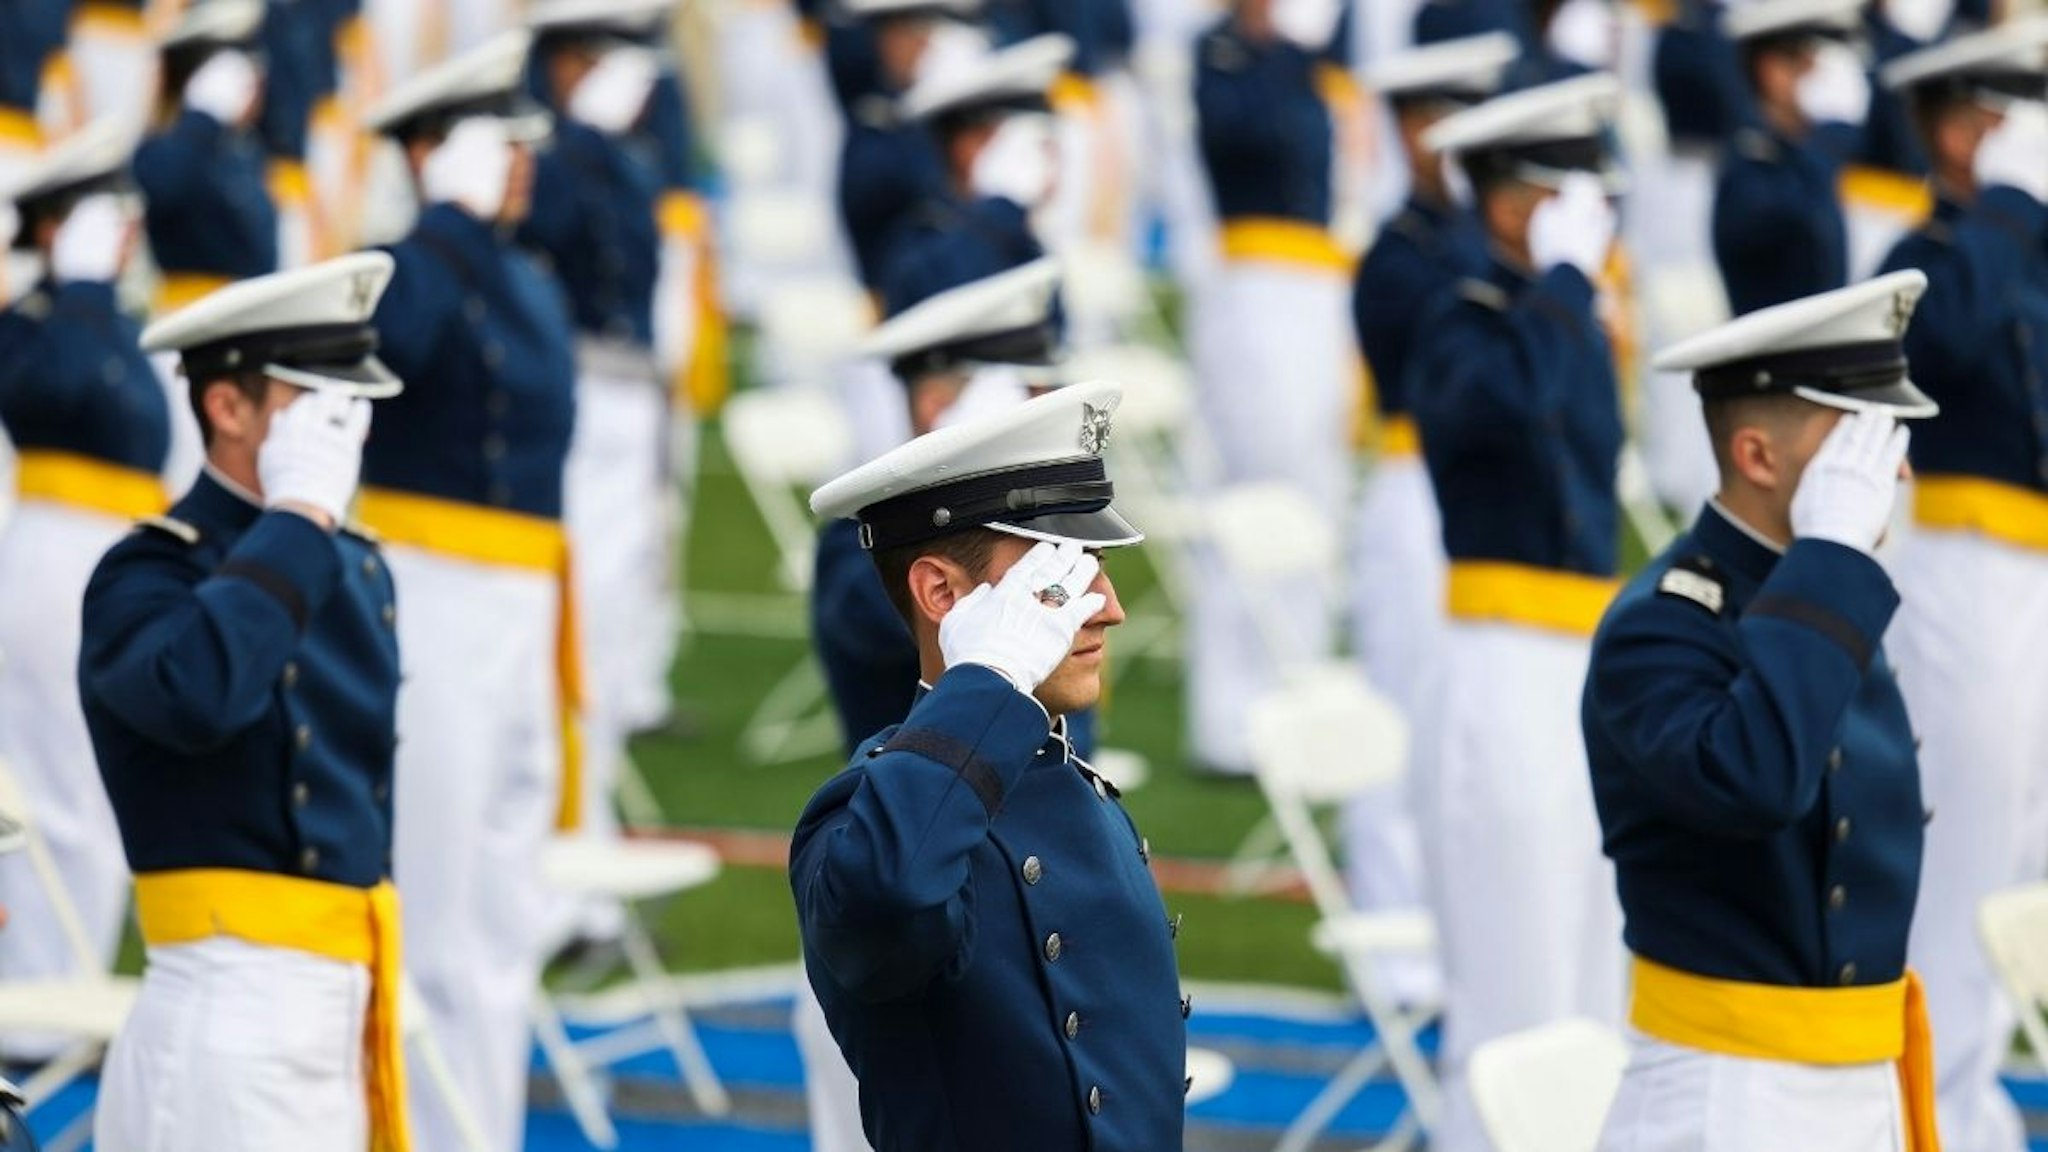 Members of the United States Air Force Academy Class of 2021 salute during their graduation ceremony at Falcon Stadium on May 26, 2021 in Colorado Springs, Colorado.